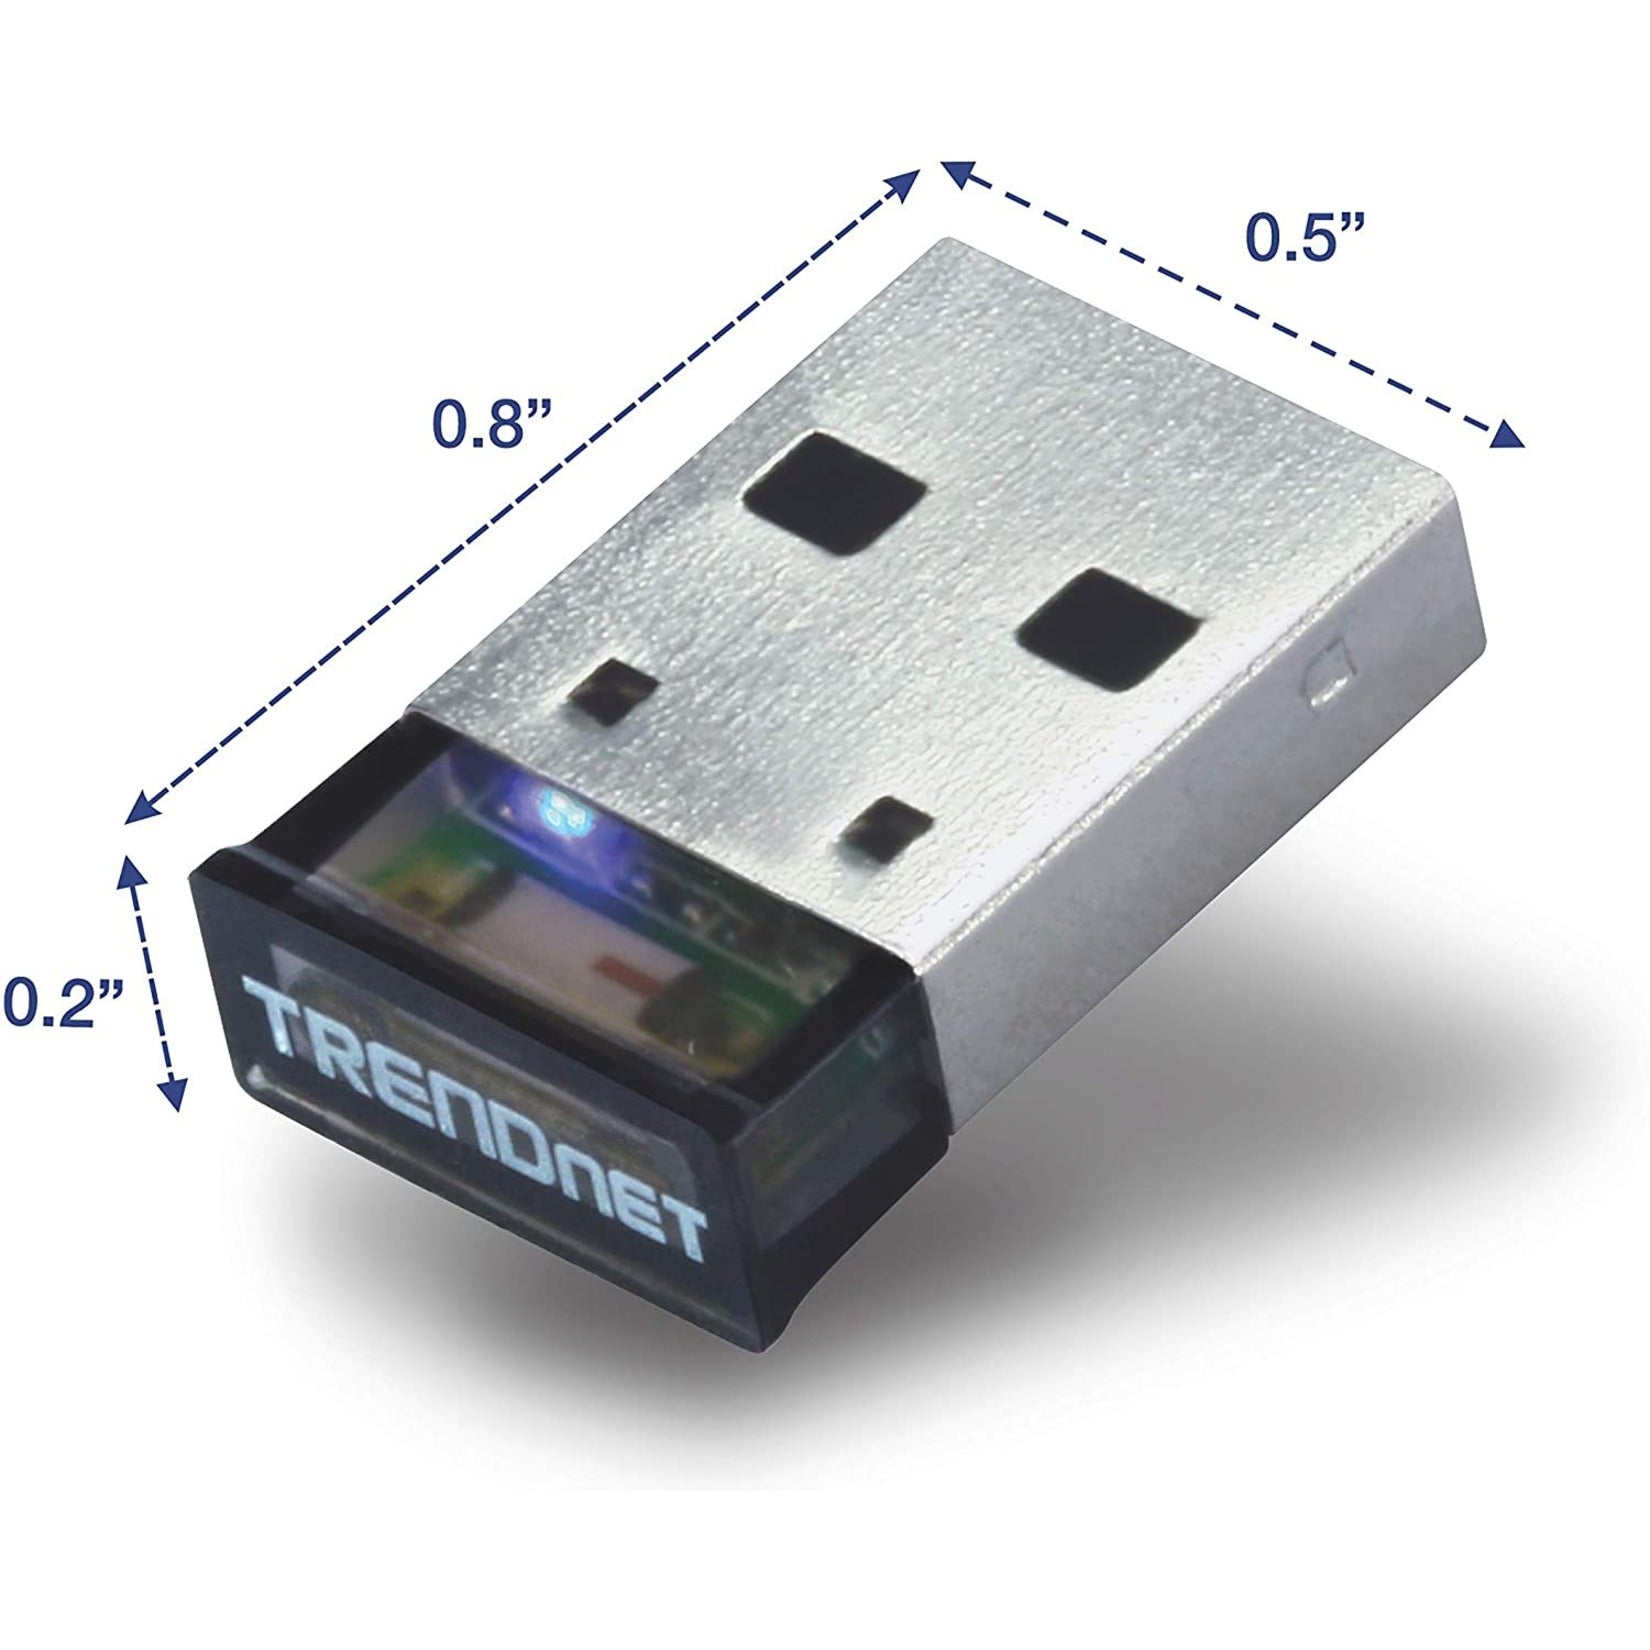 TRENDnet TBW-106UB Micro Bluetooth USB Adapter, Long Range up to 100 Meters, Compatible with Windows and Stereo Headsets